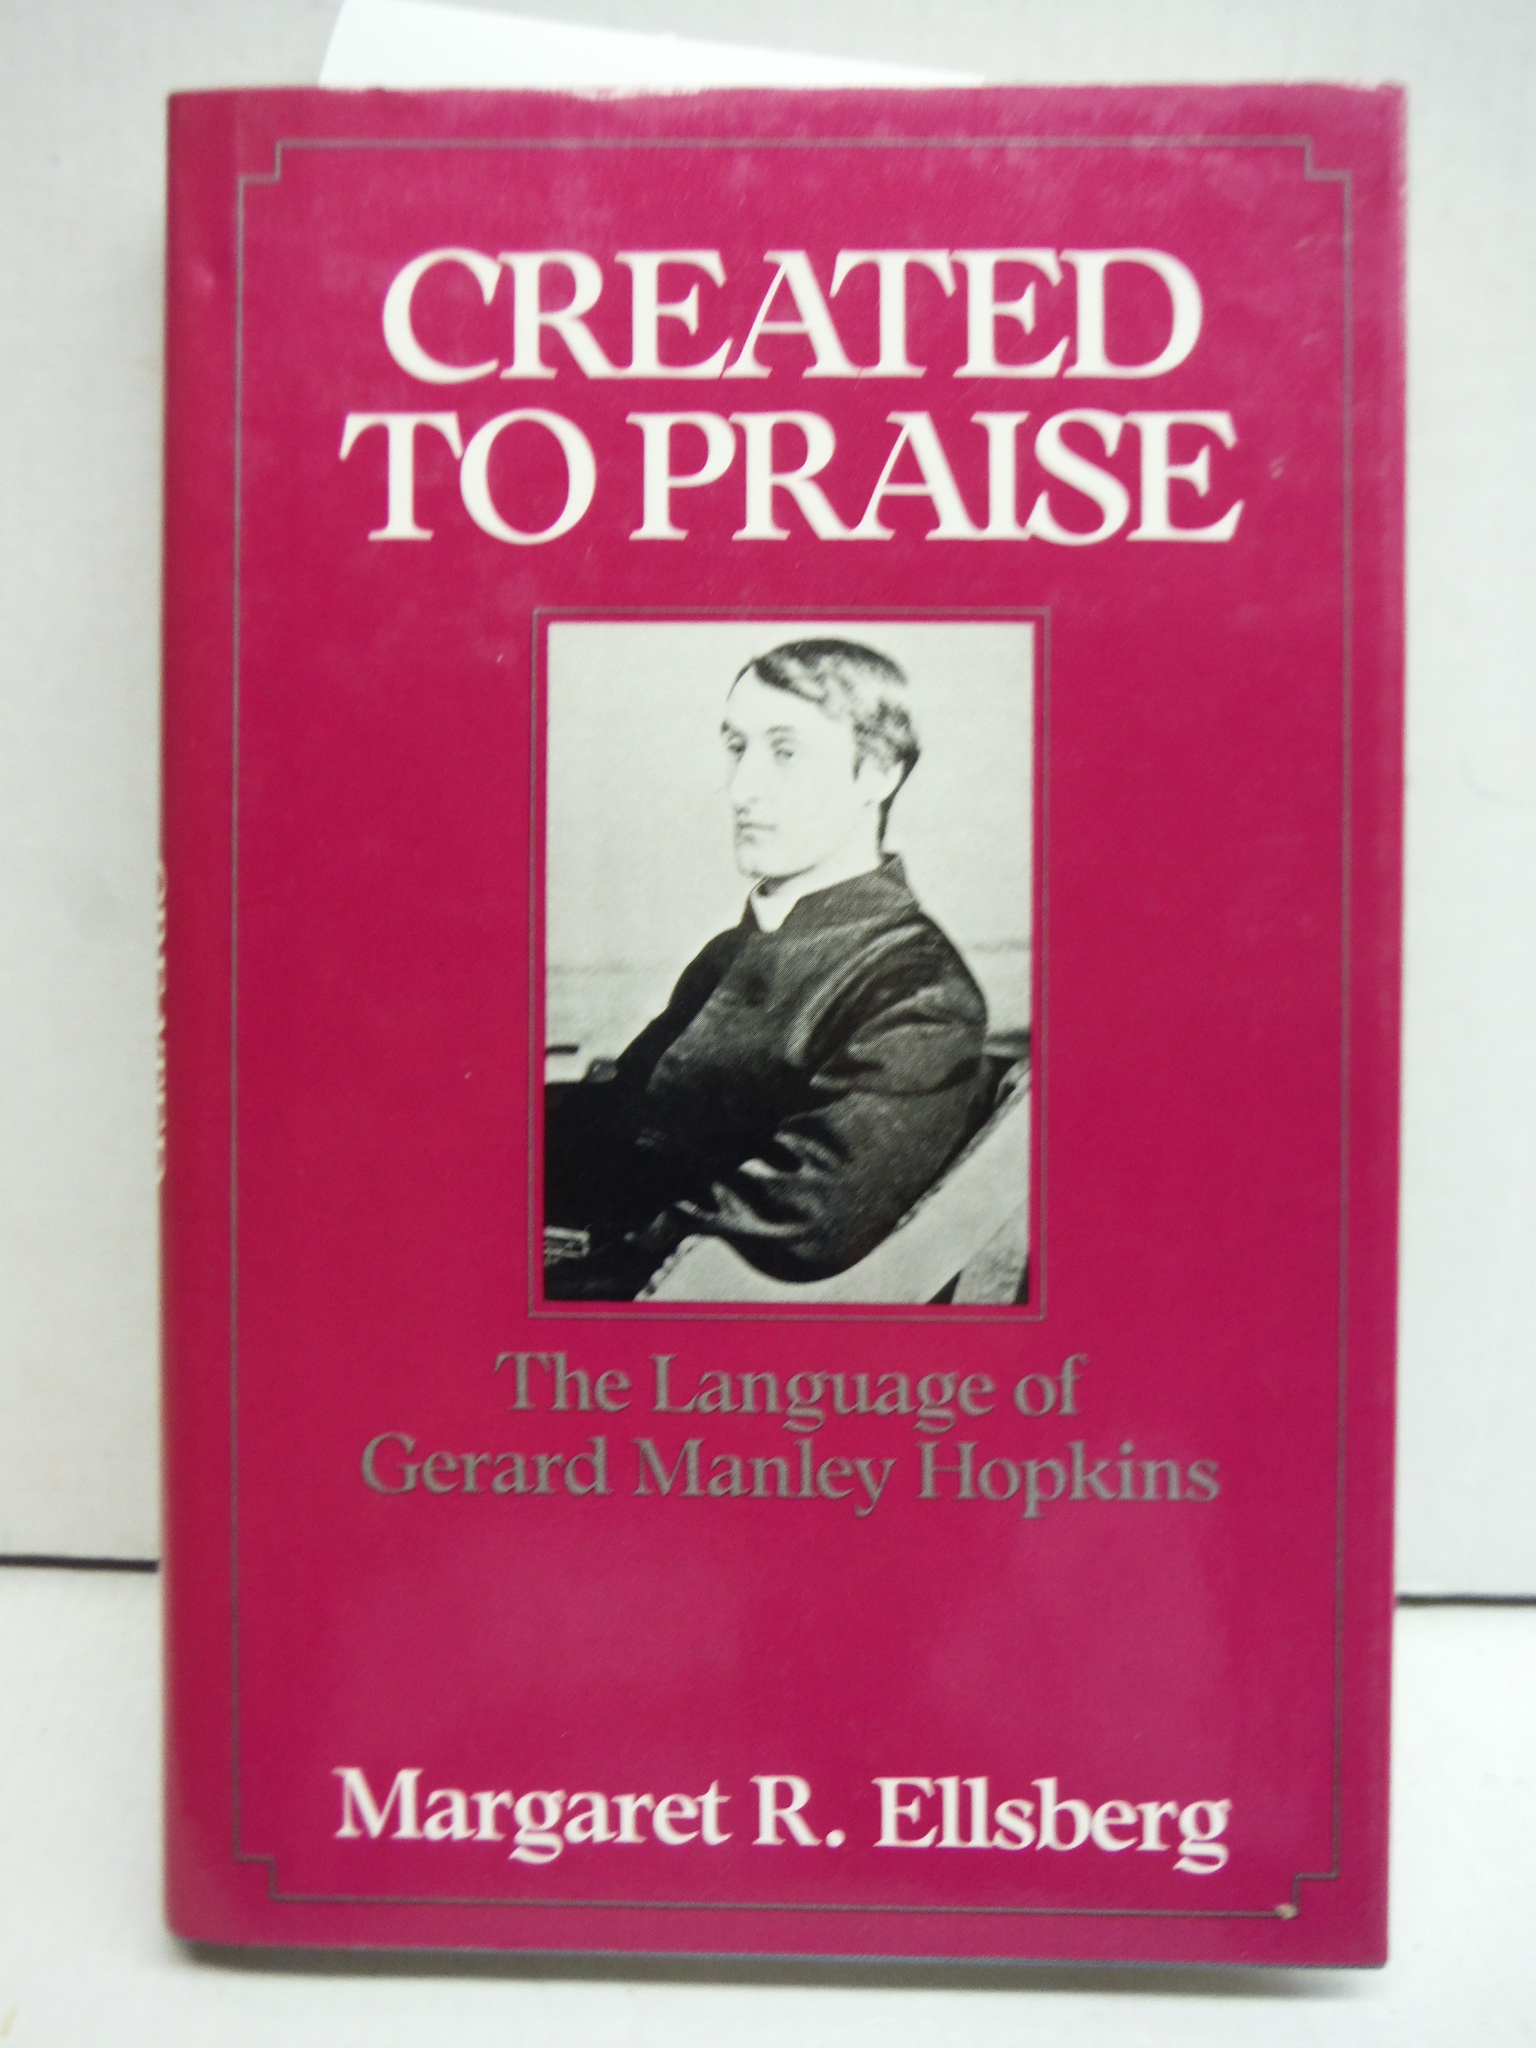 Created to Praise: The Language of Gerard Manley Hopkins